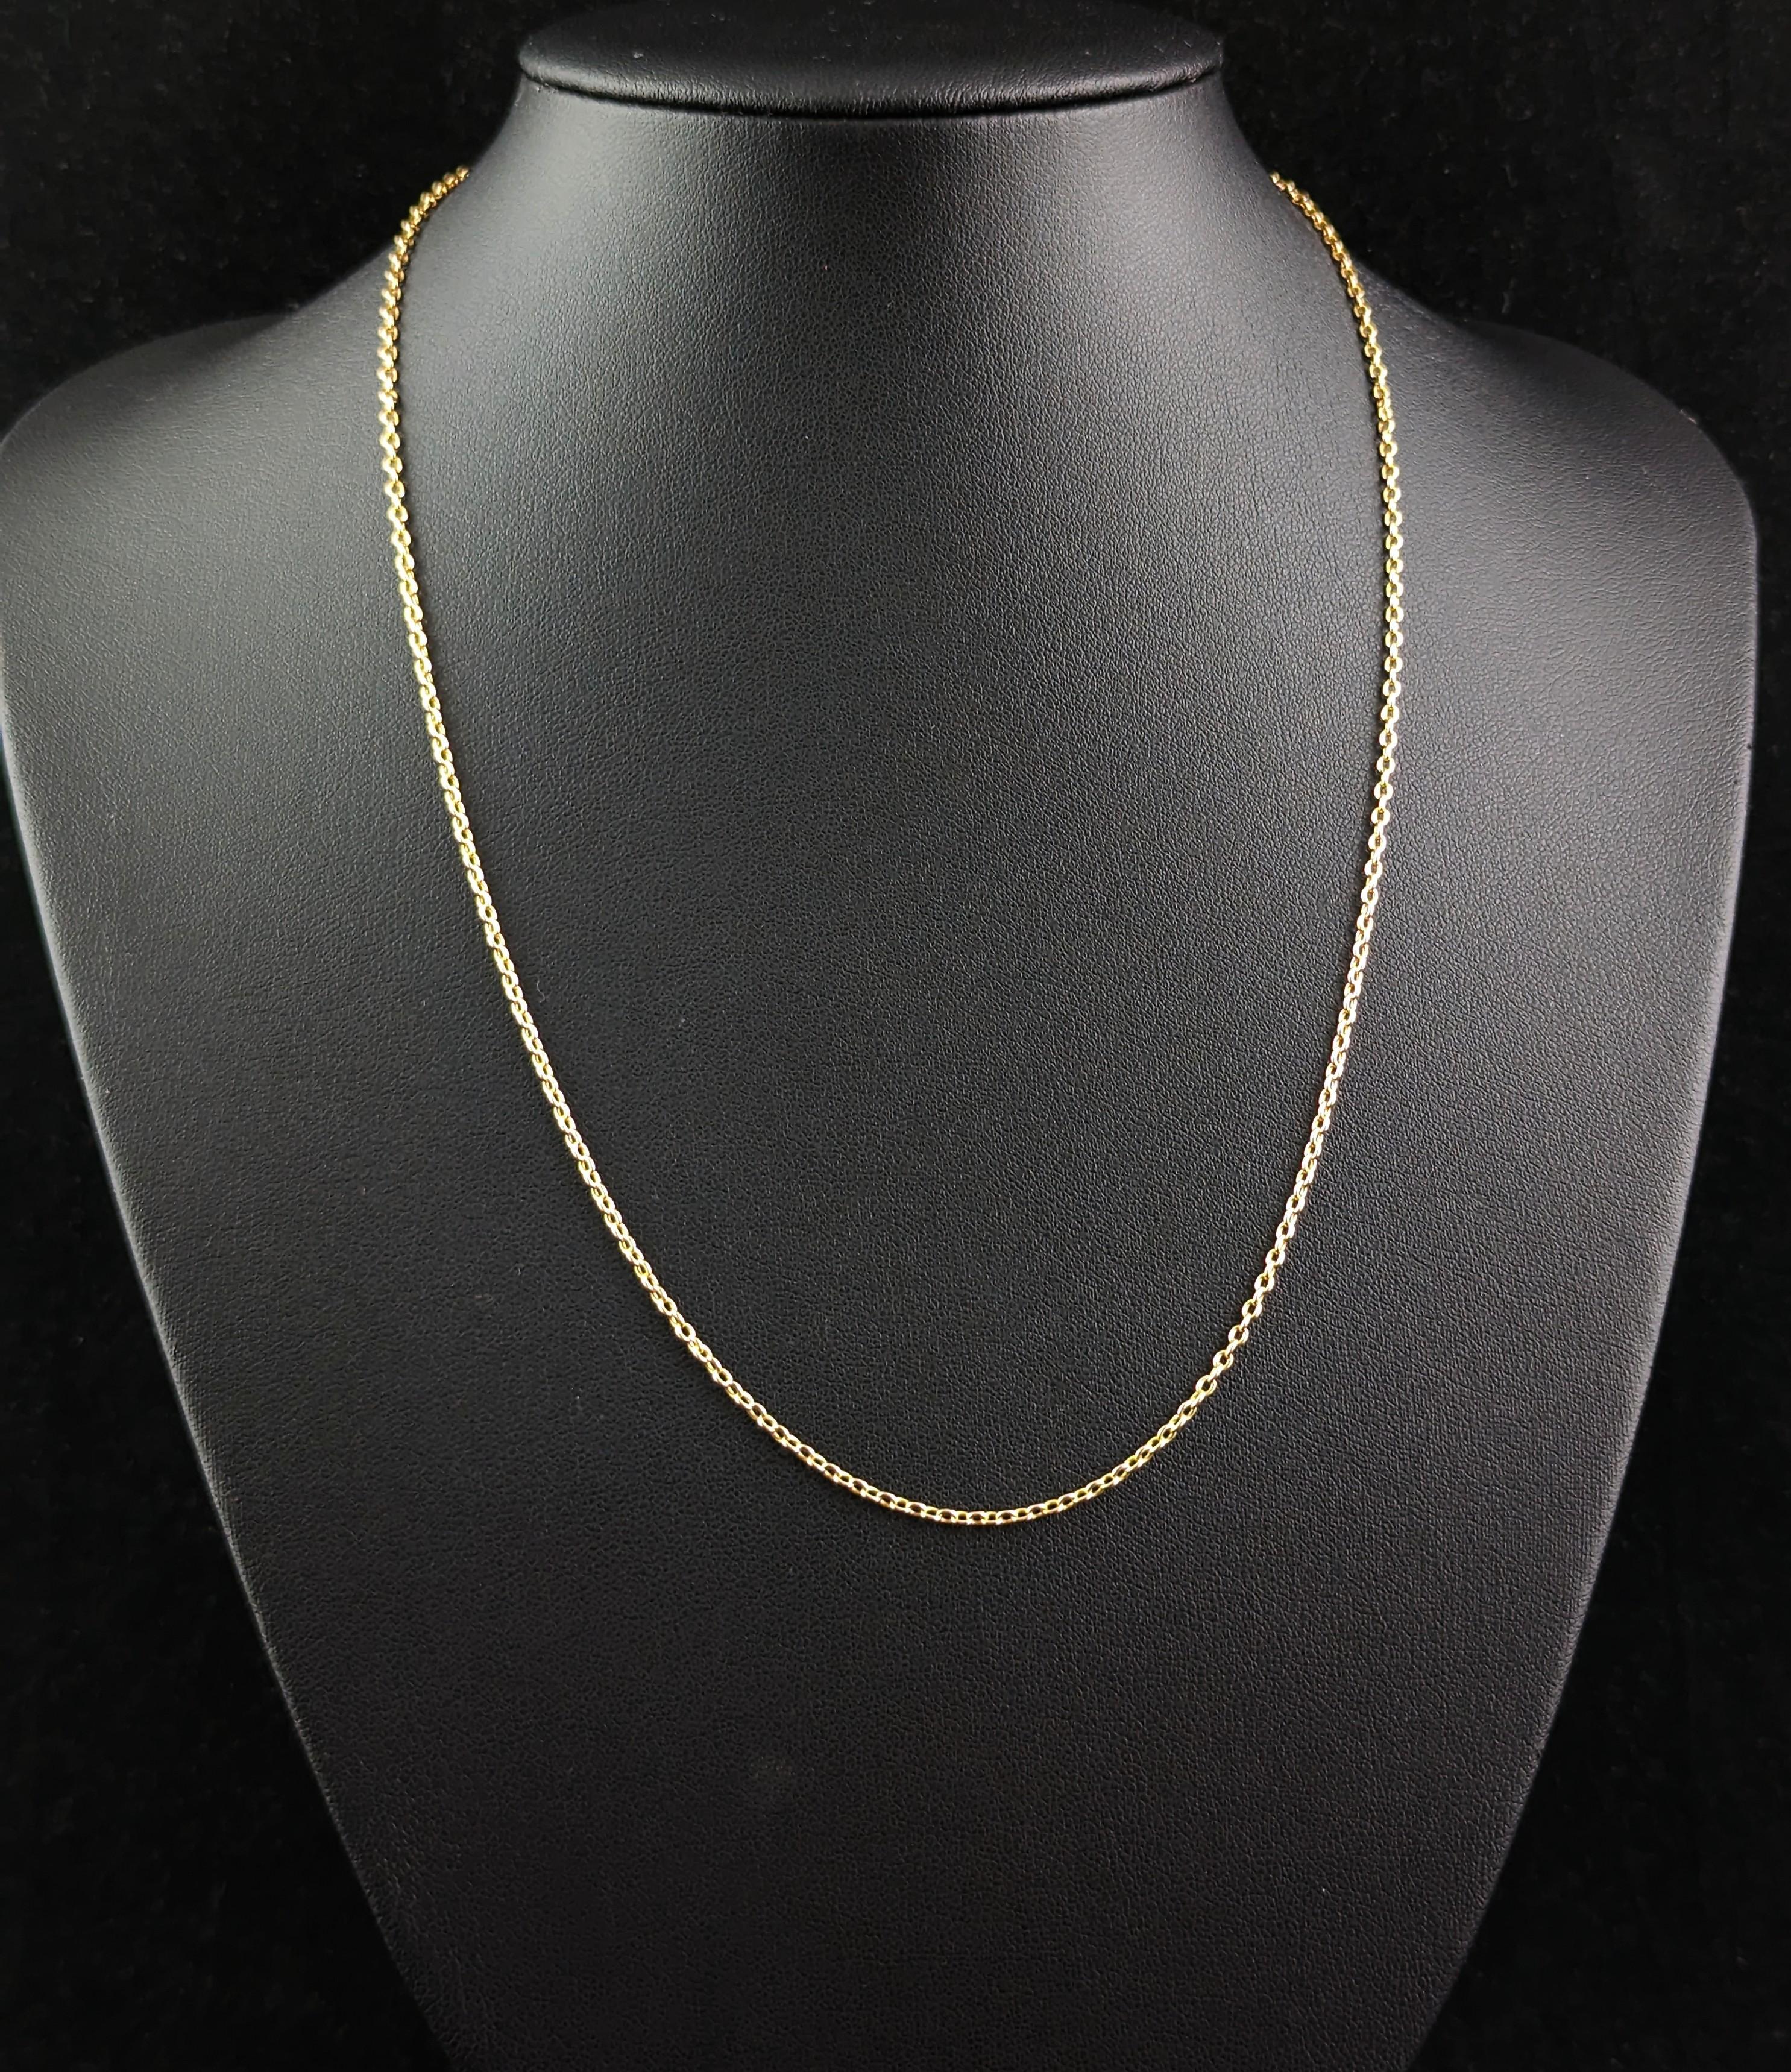 Antique 15k Yellow Gold Chain Necklace, Rolo Link 5